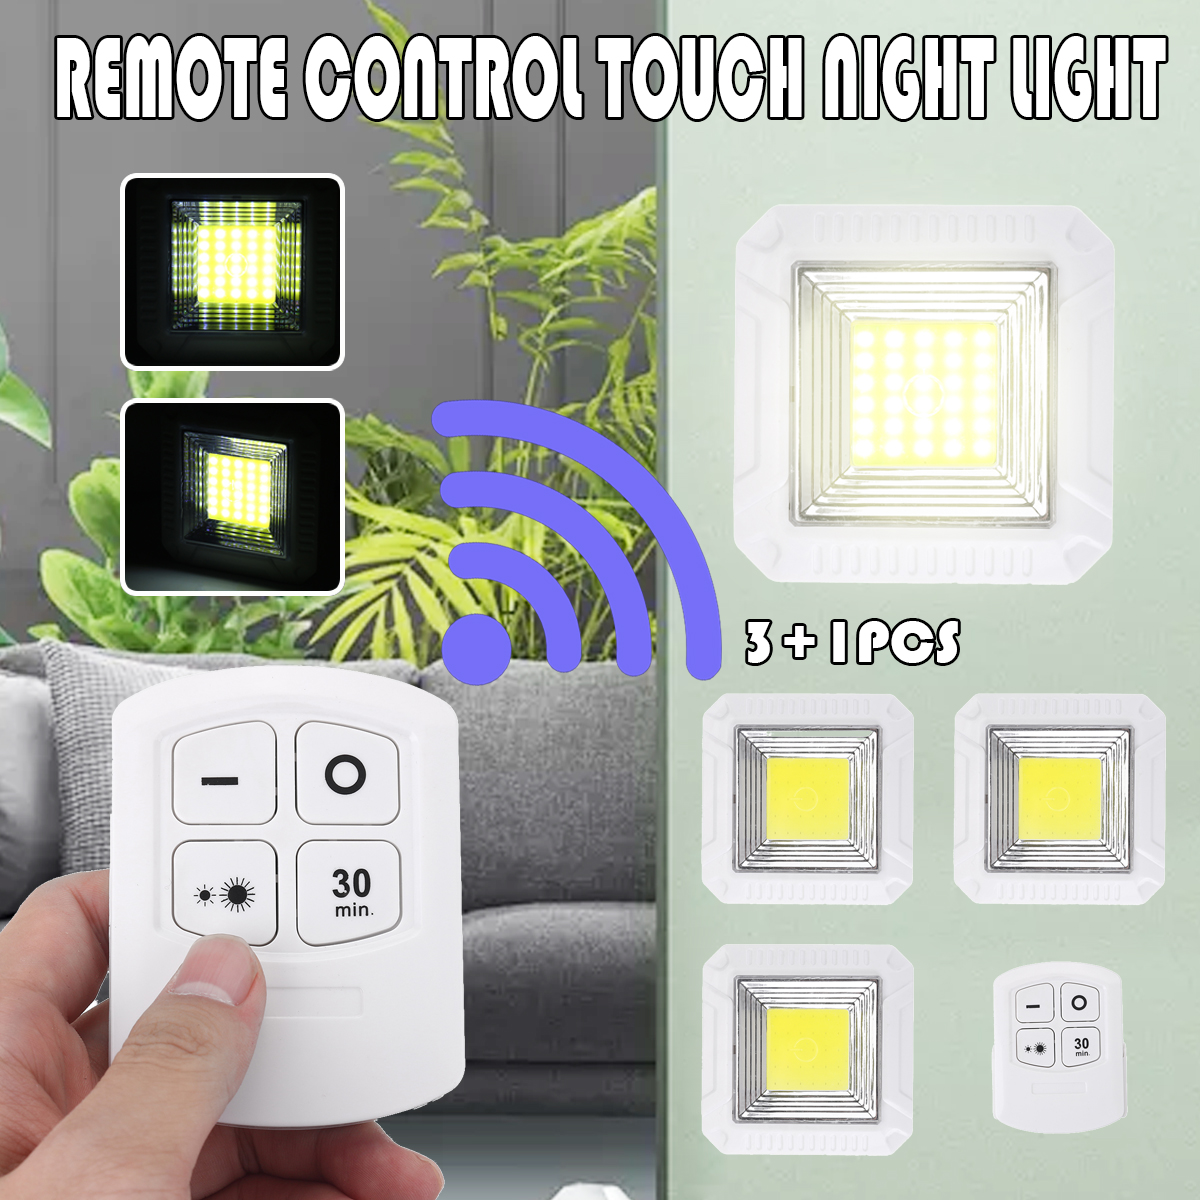 3Pcs-150LM-3W-LED-Lamp-Wireless-Remote-Control-Touch-Night-Light-RC-Bedroom-Sensing-Night-Light-for--1687927